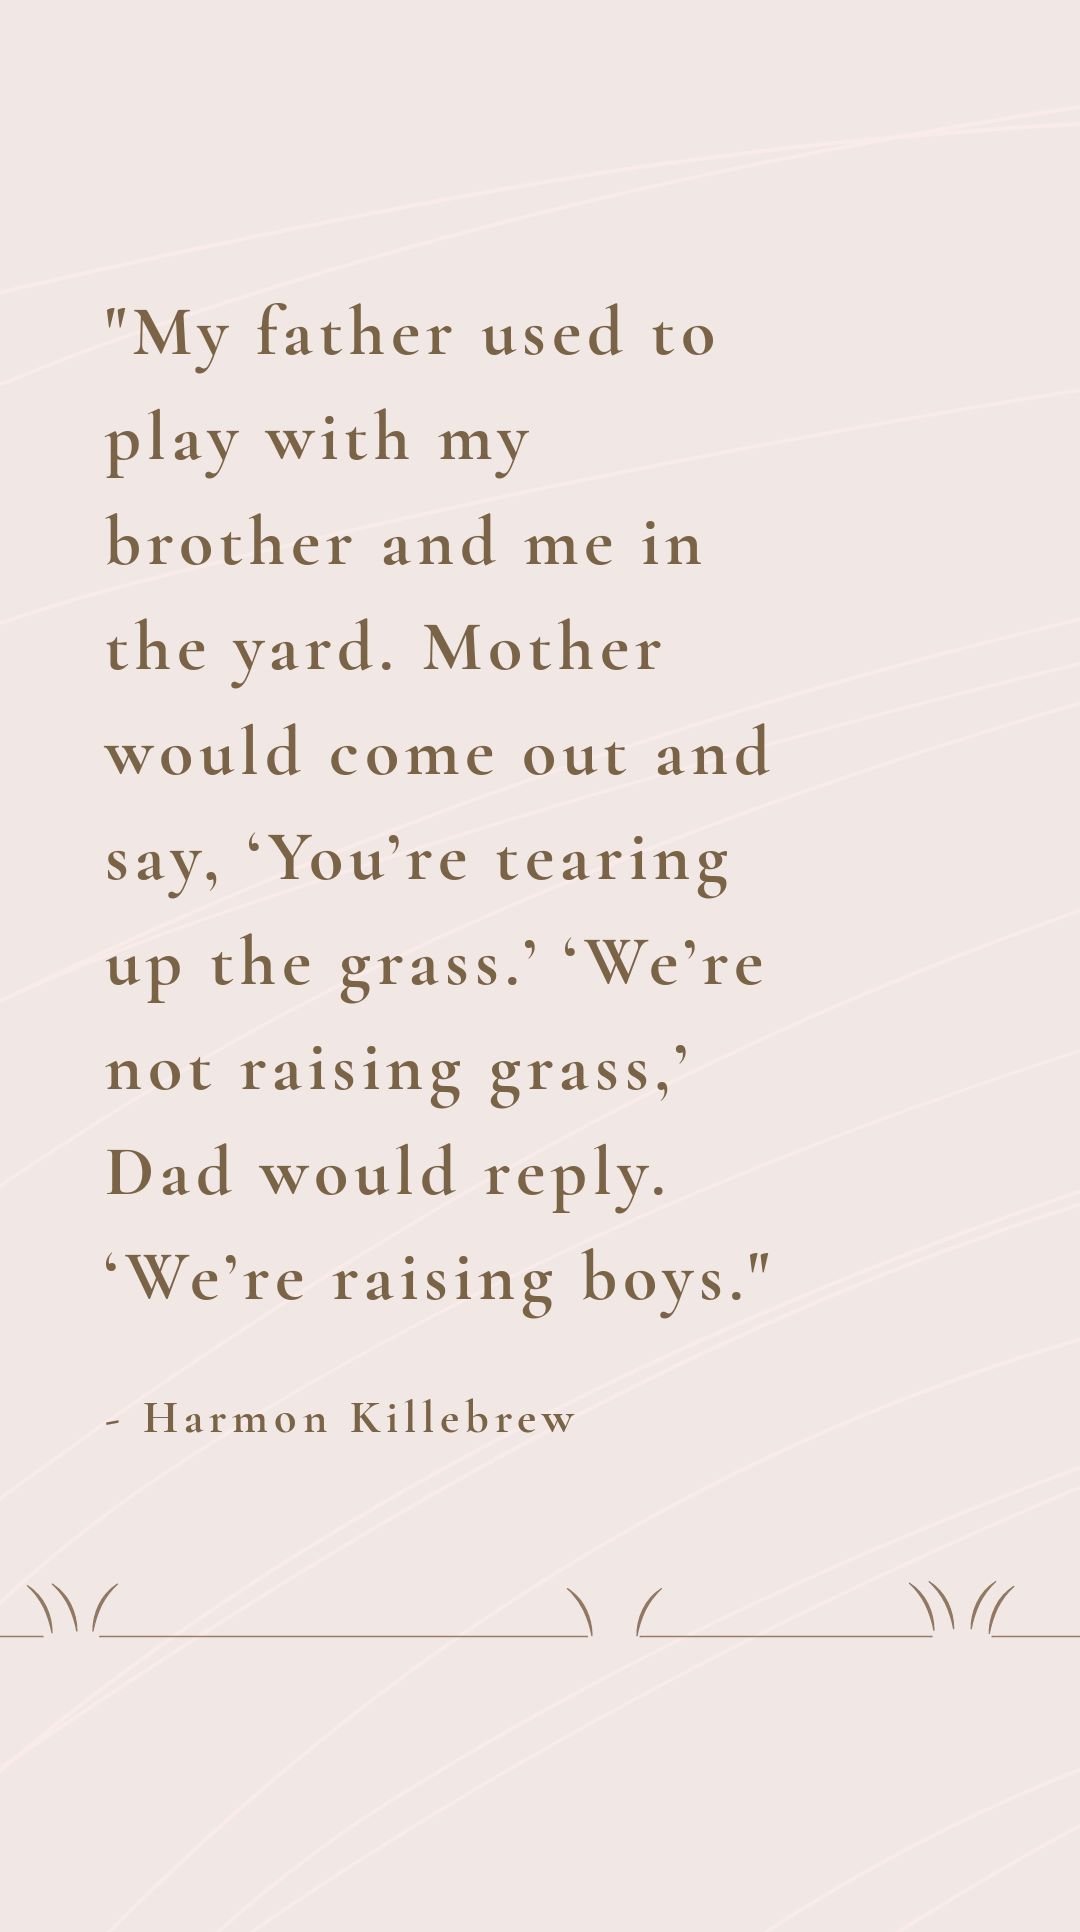 Harmon Killebrew - My father used to play with my brother and me in the yard. Mother would come out and say, ‘You’re tearing up the grass.’ ‘We’re not raising grass,’ Dad would reply. ‘We’re raising b